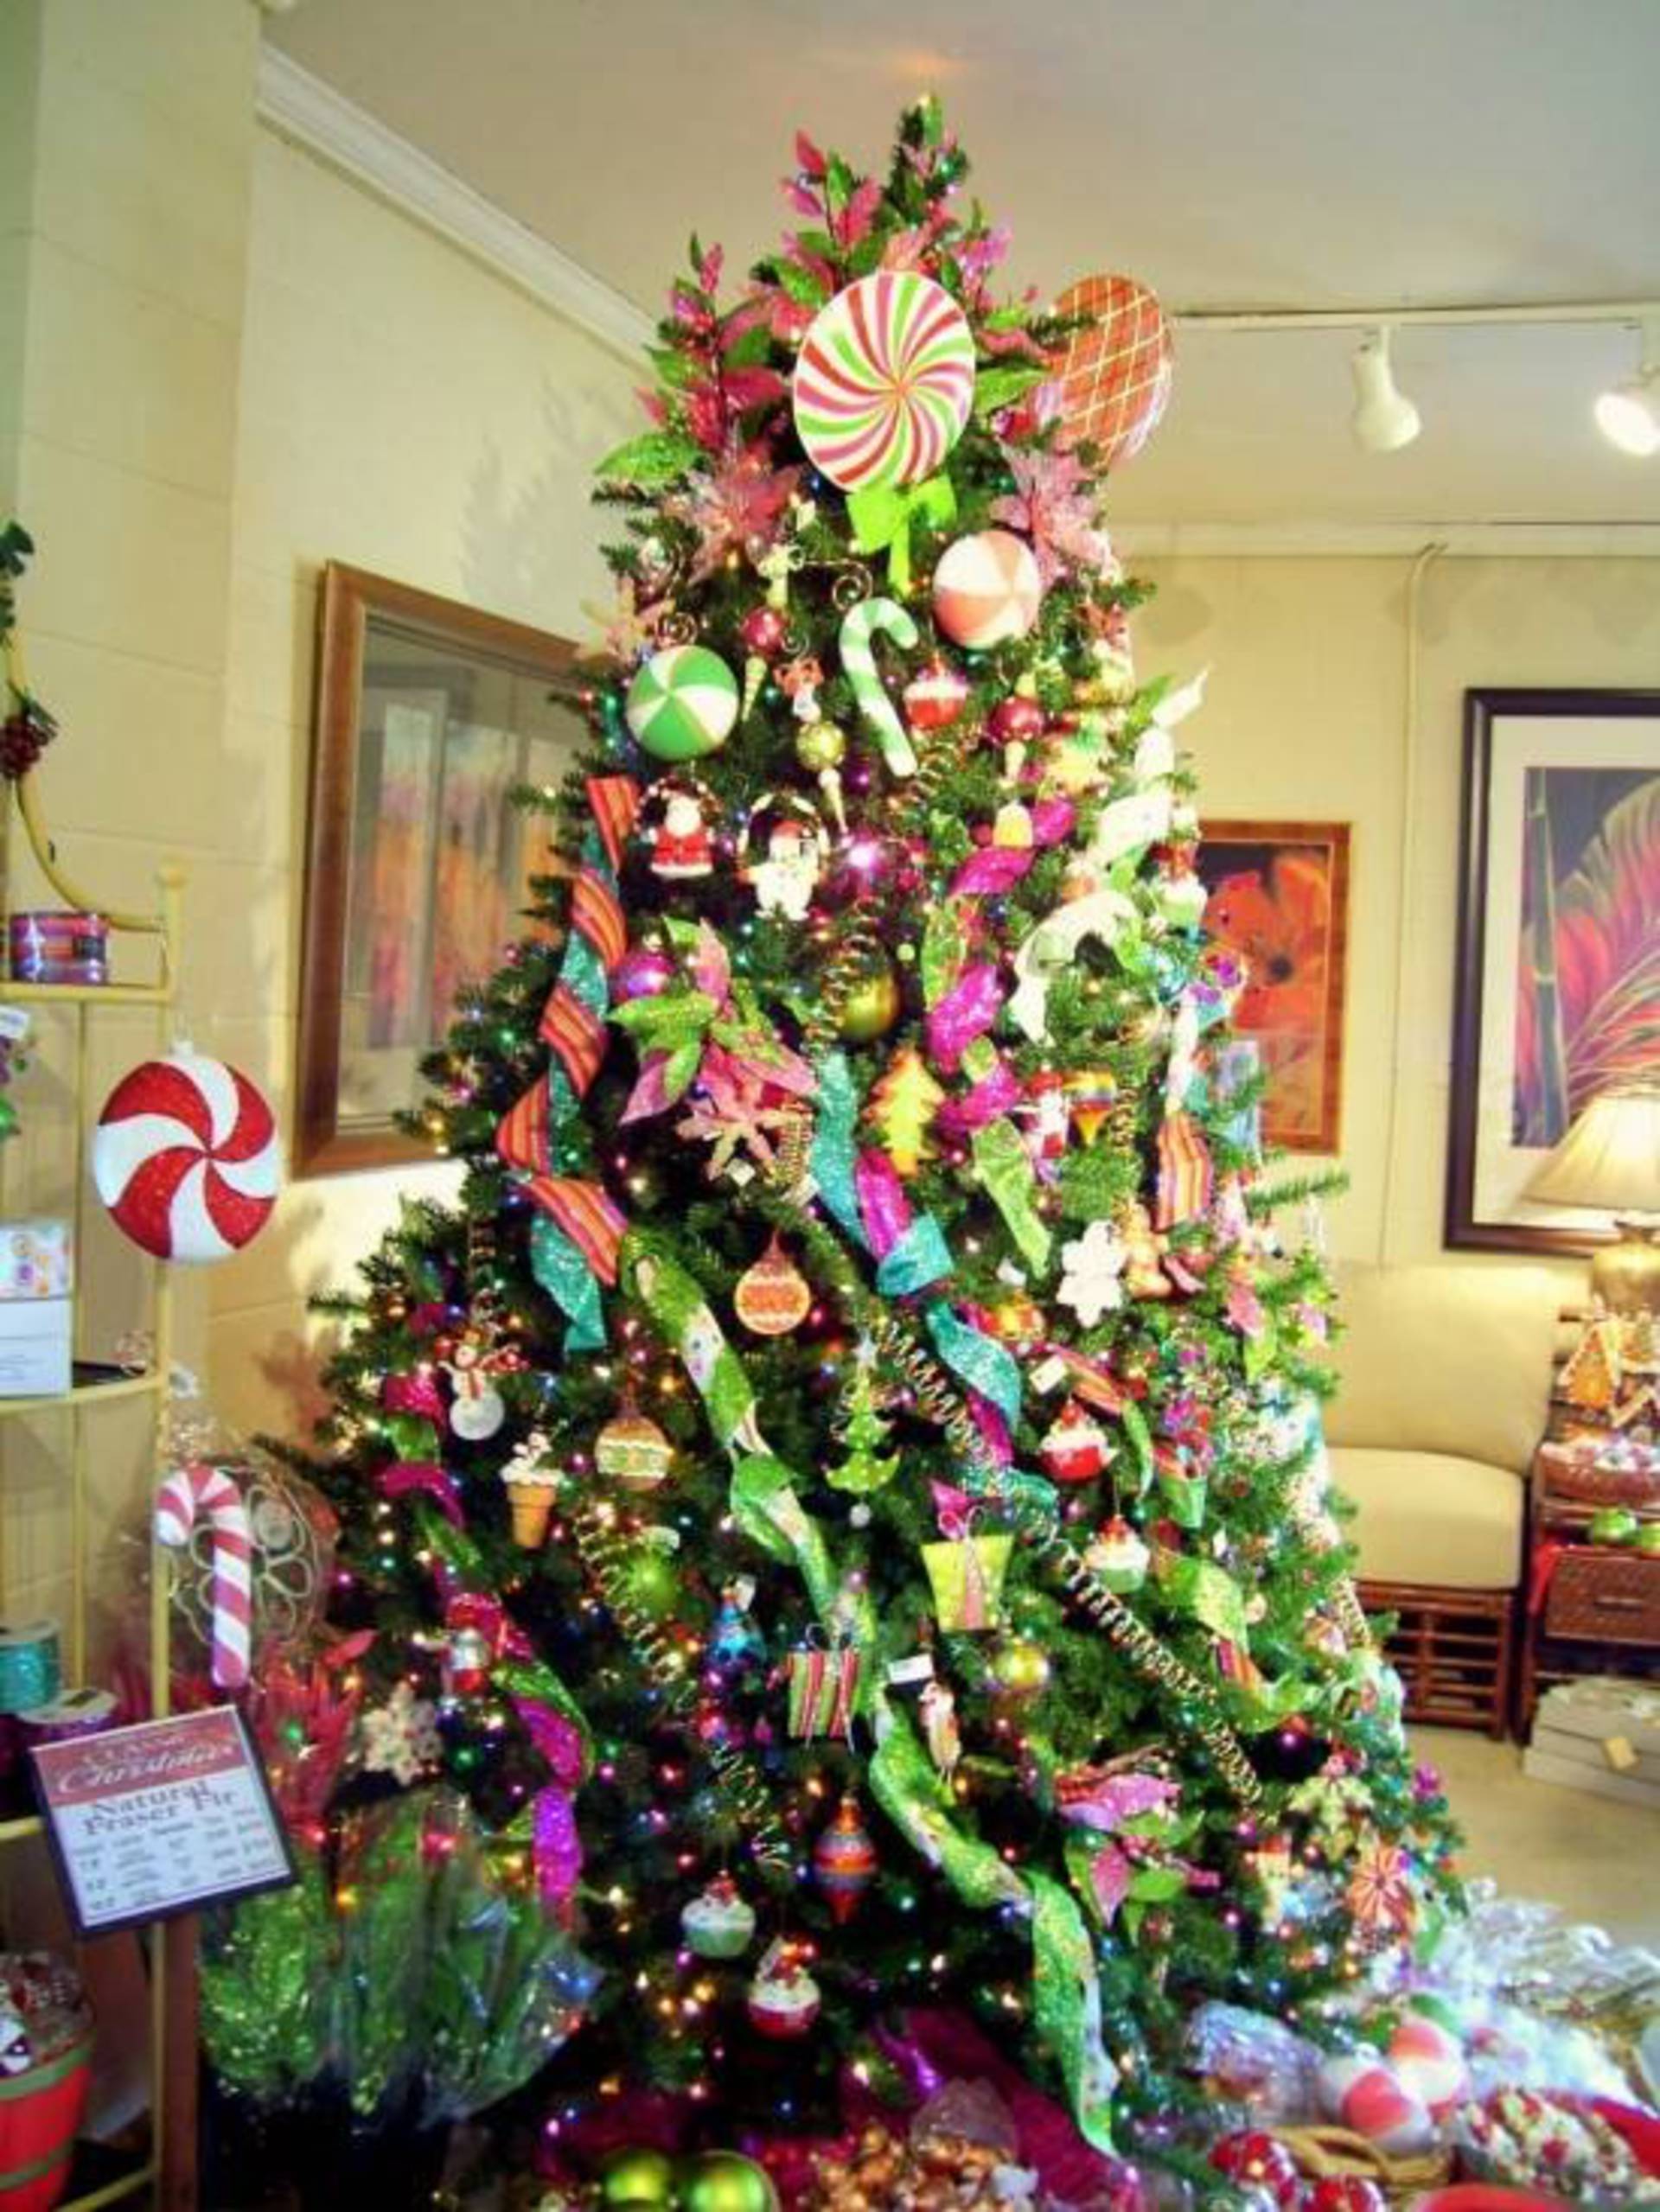 More about Christmas Tree - Home Reviews